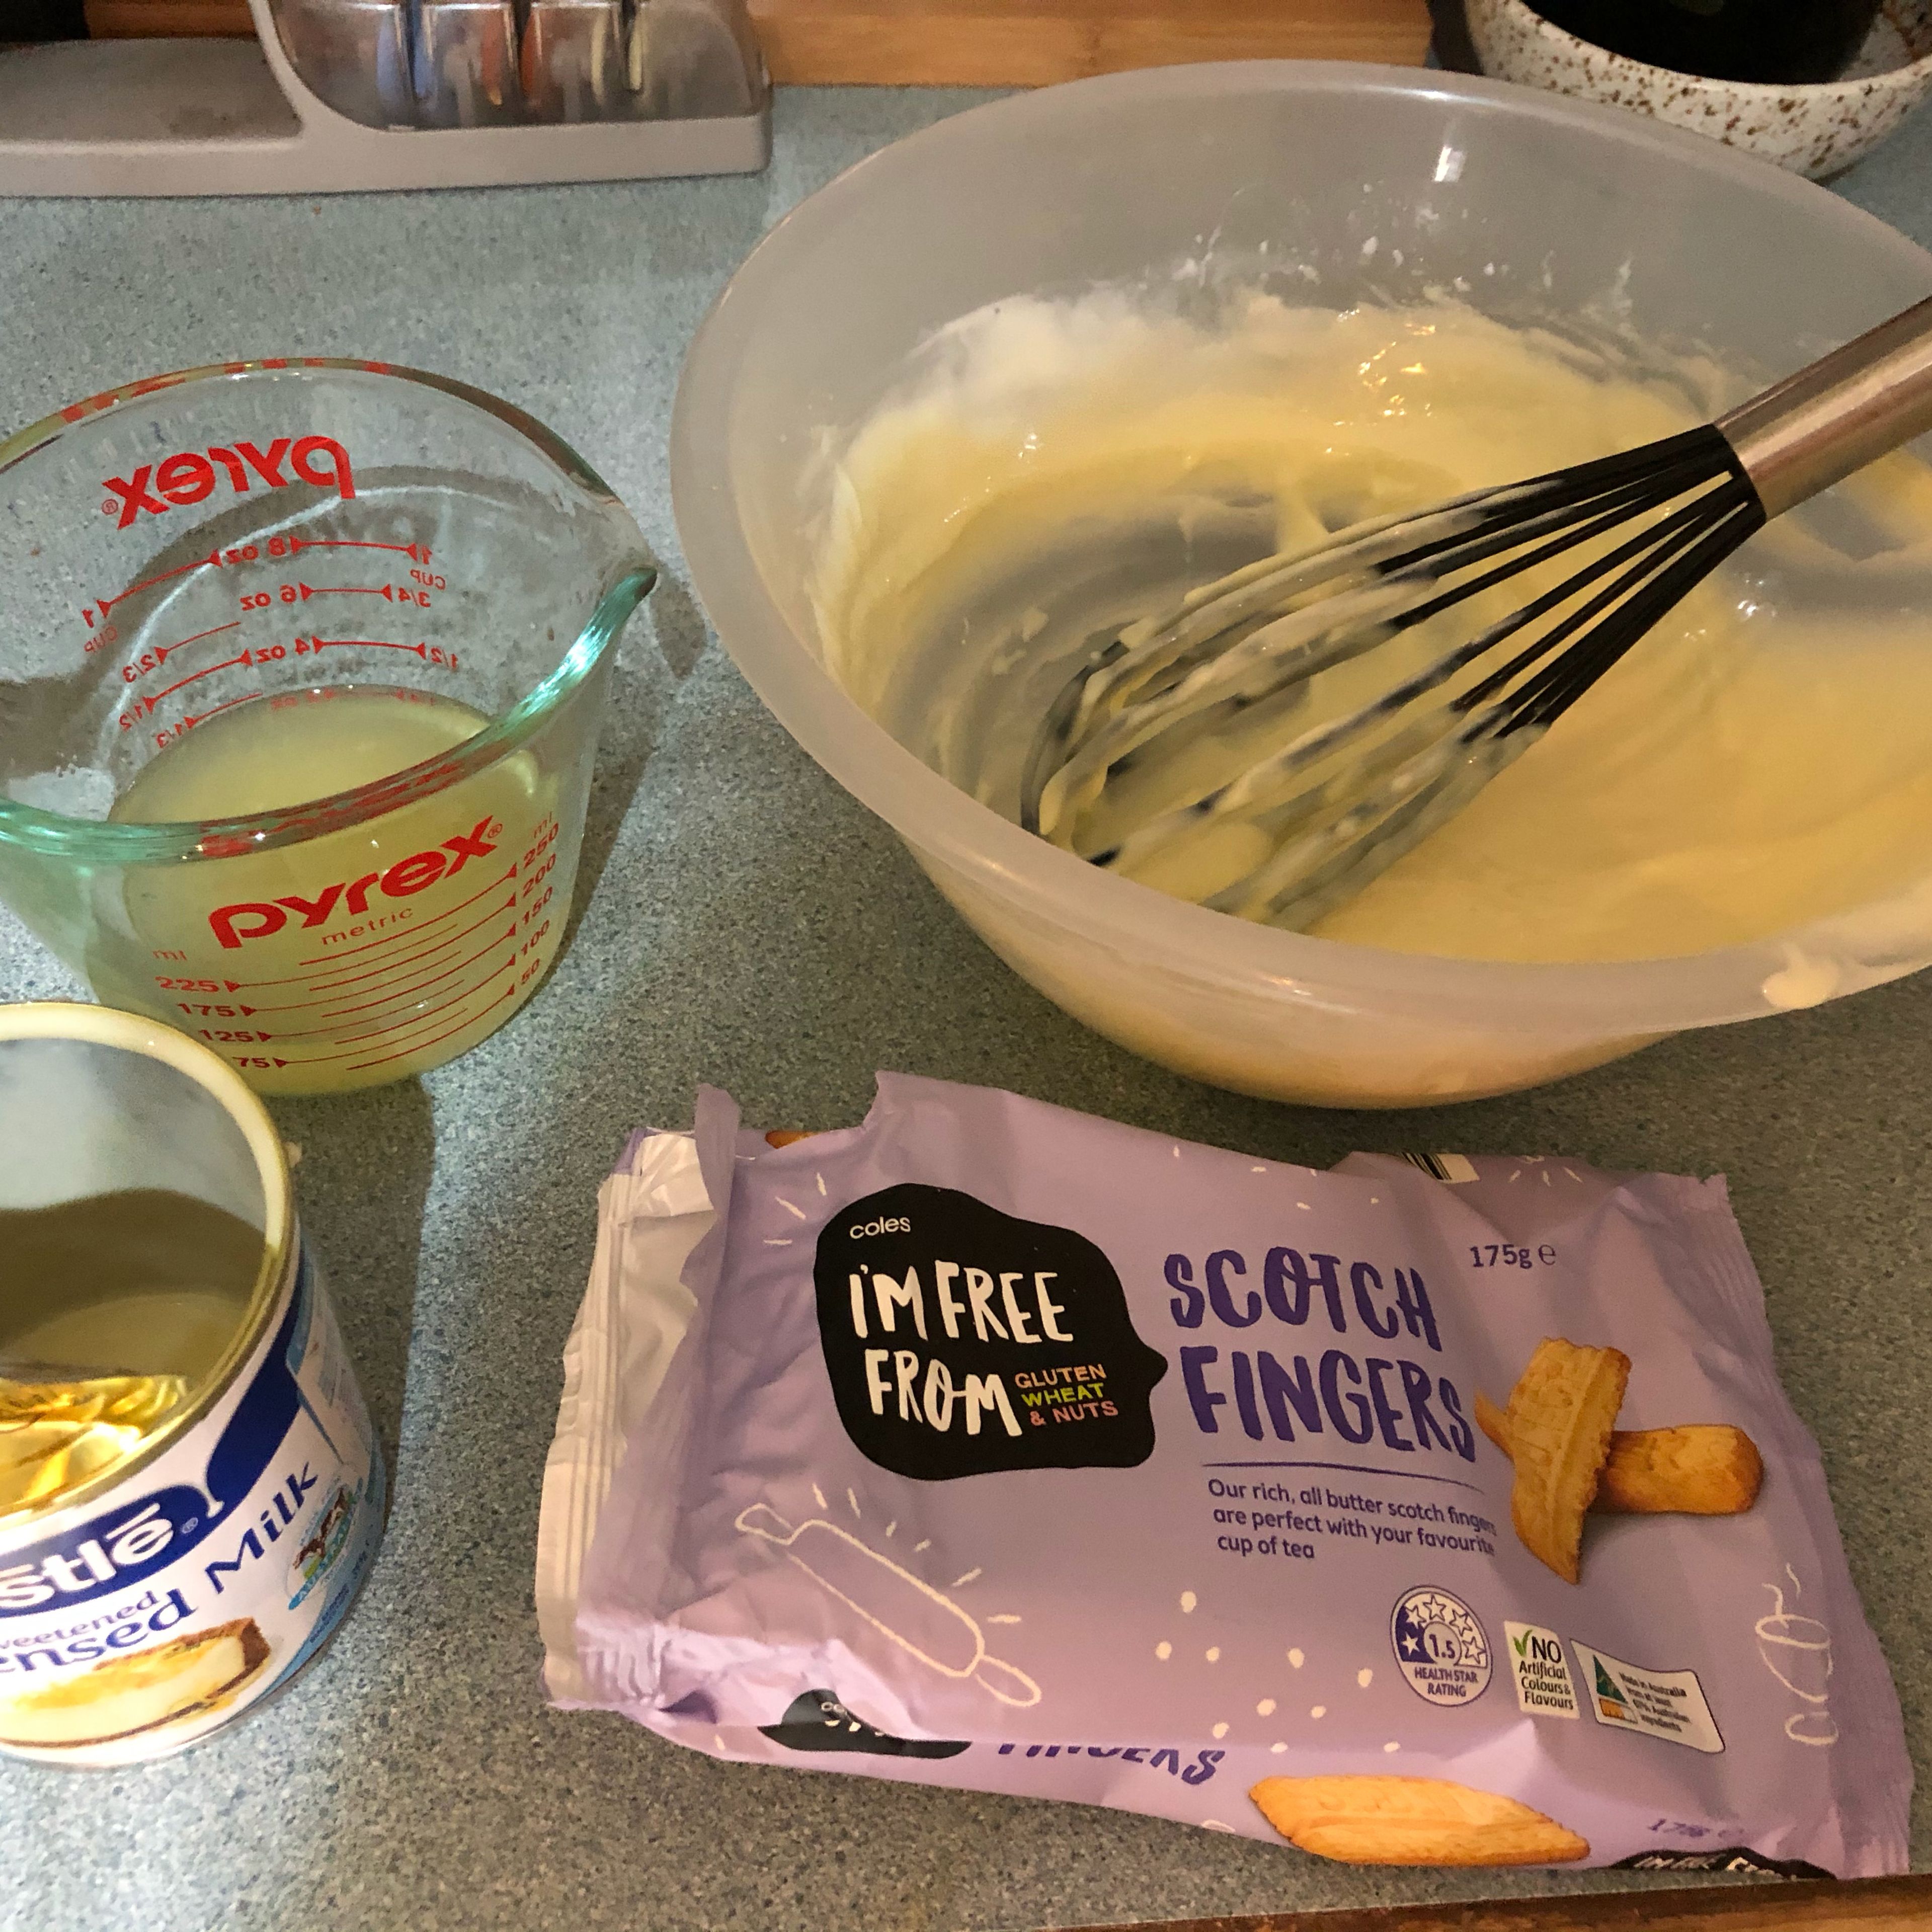 Combine the two types of milk and add lemon juice step by step while whisking (no, milk does not curdle).